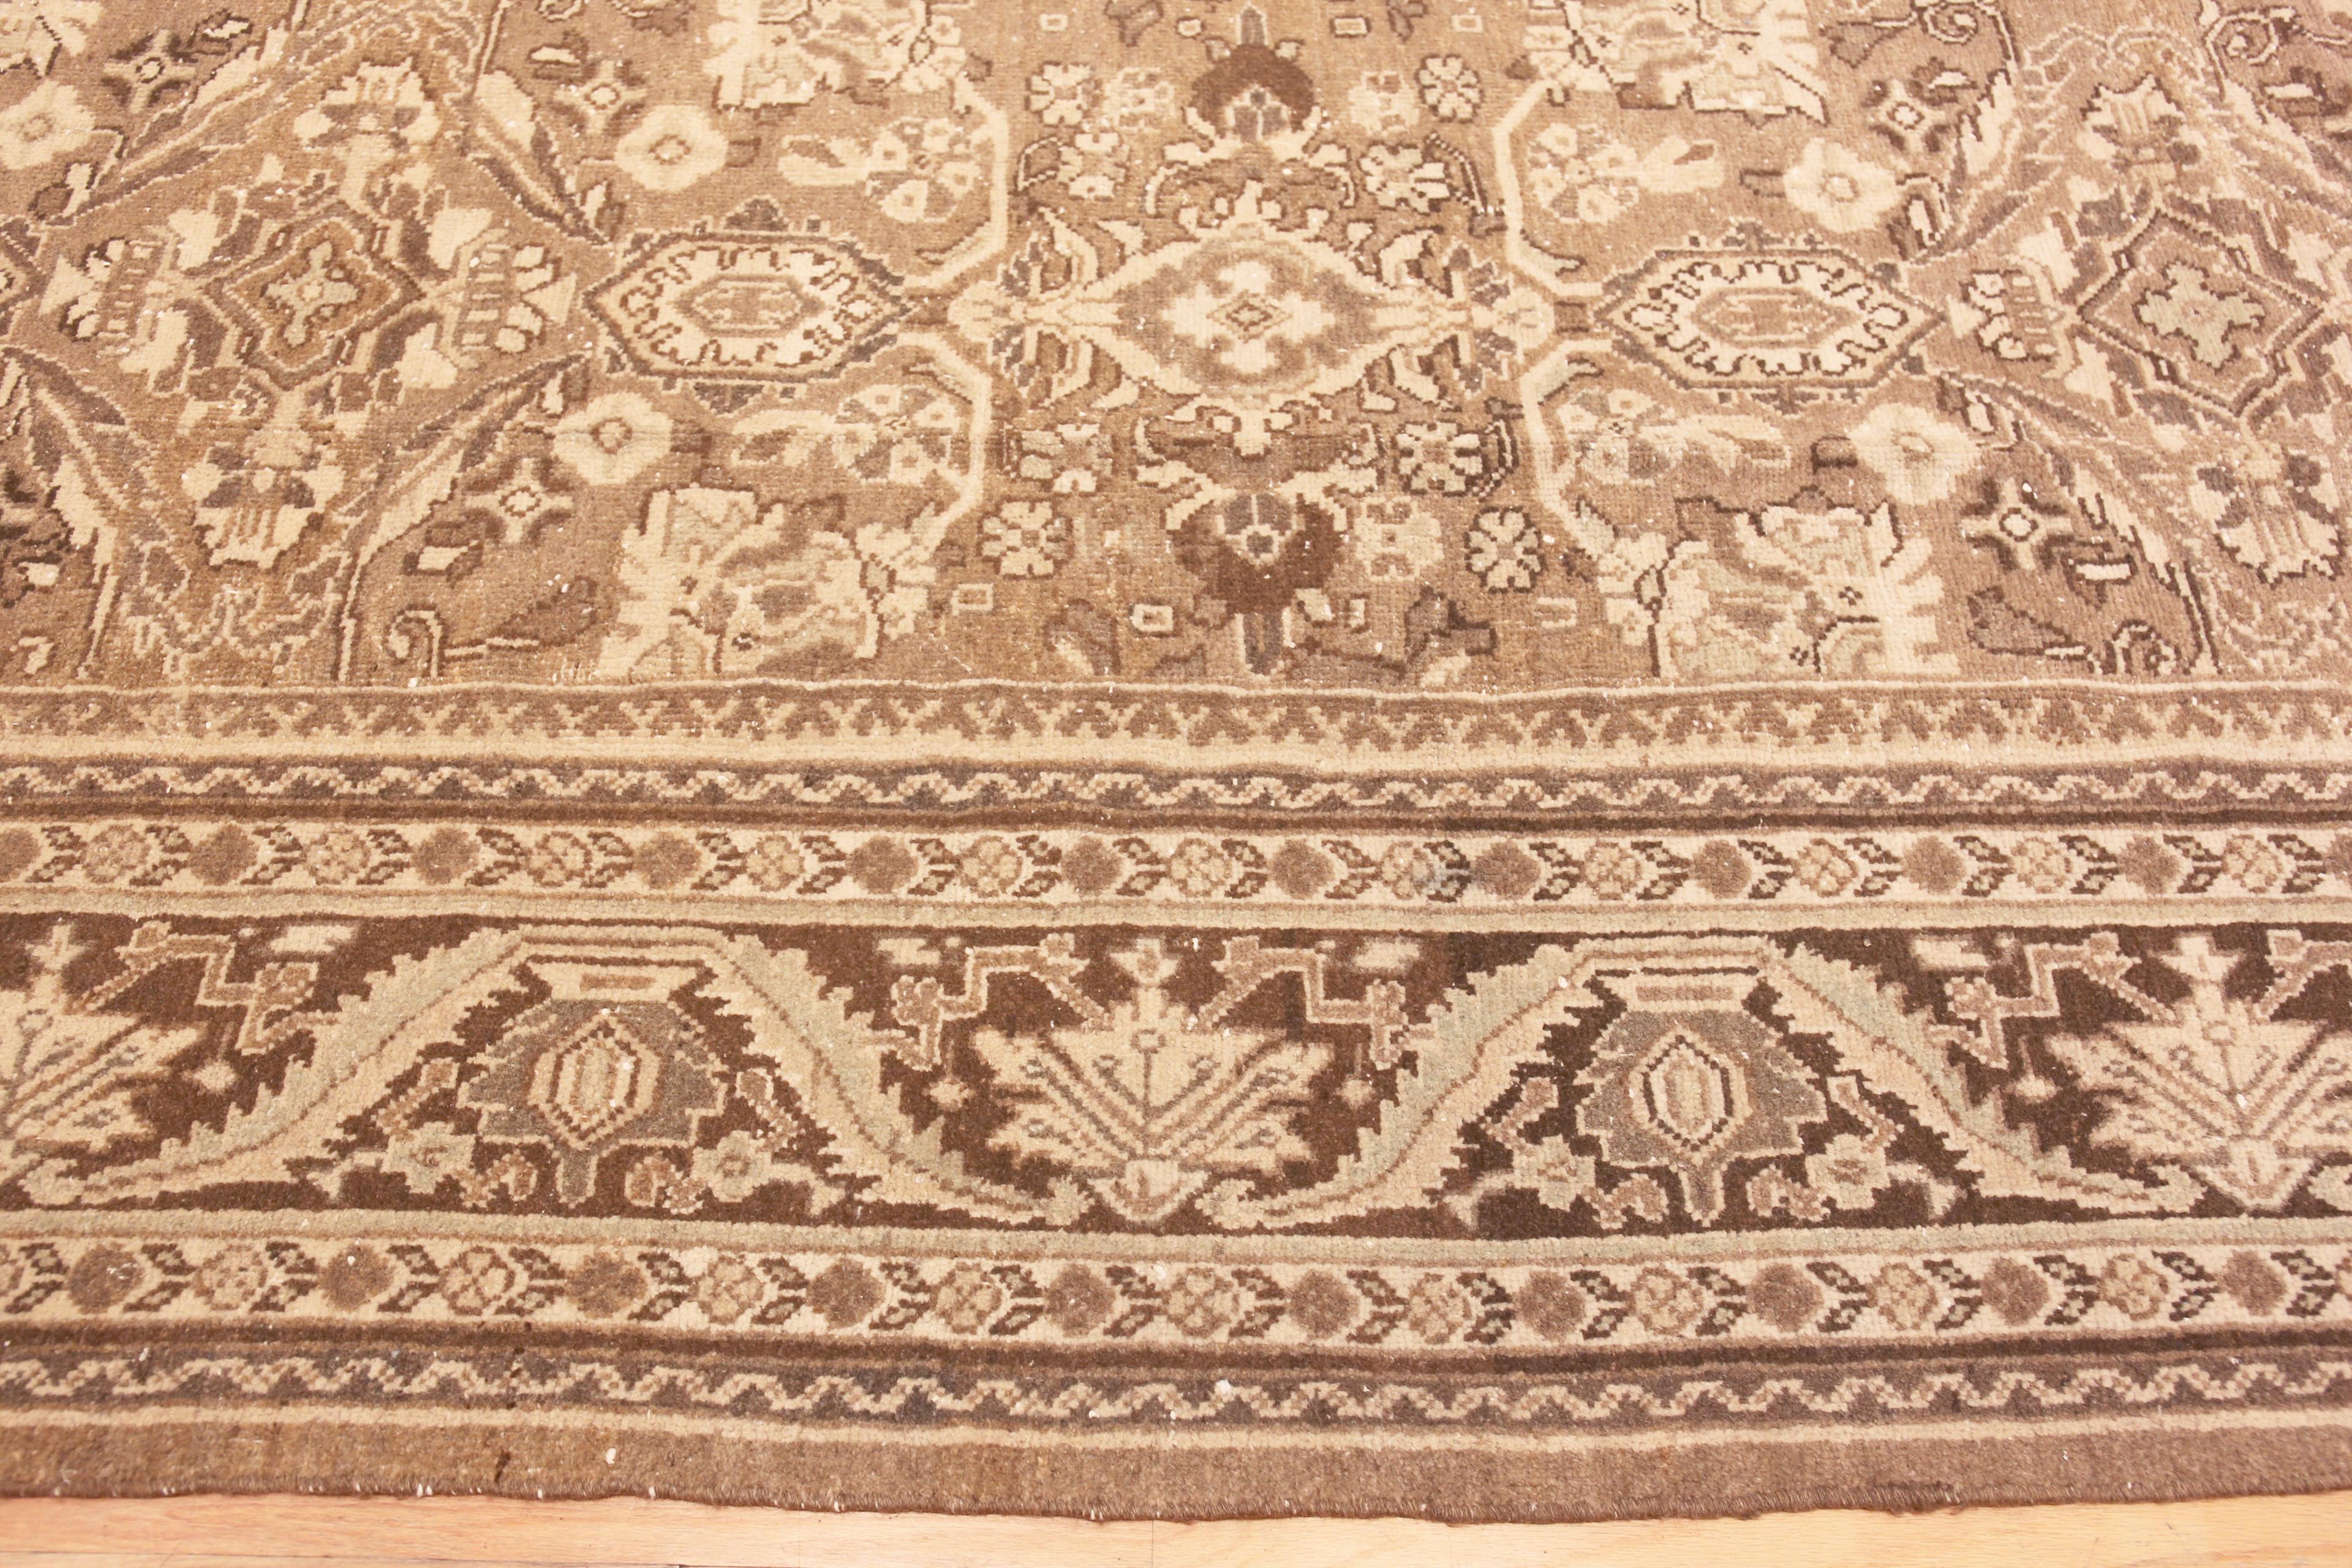 19th Century Magnificent Antique Geometric Persian Sultanabad Rug 10'6